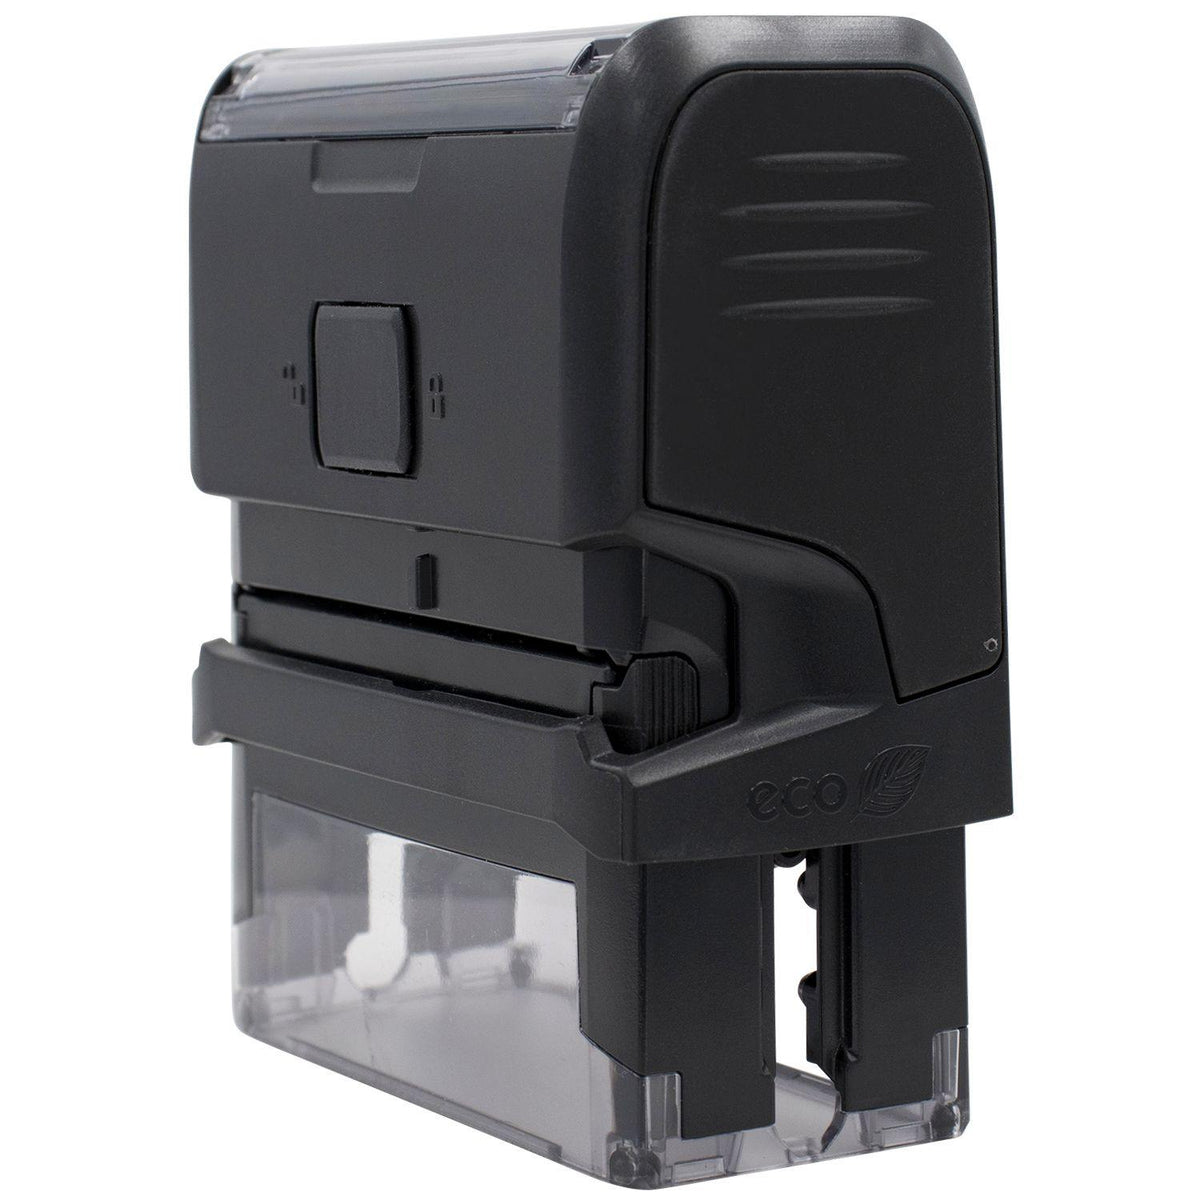 Large Self Inking Personal Confidential Stamp - Engineer Seal Stamps - Brand_Trodat, Impression Size_Large, Stamp Type_Self-Inking Stamp, Type of Use_Professional